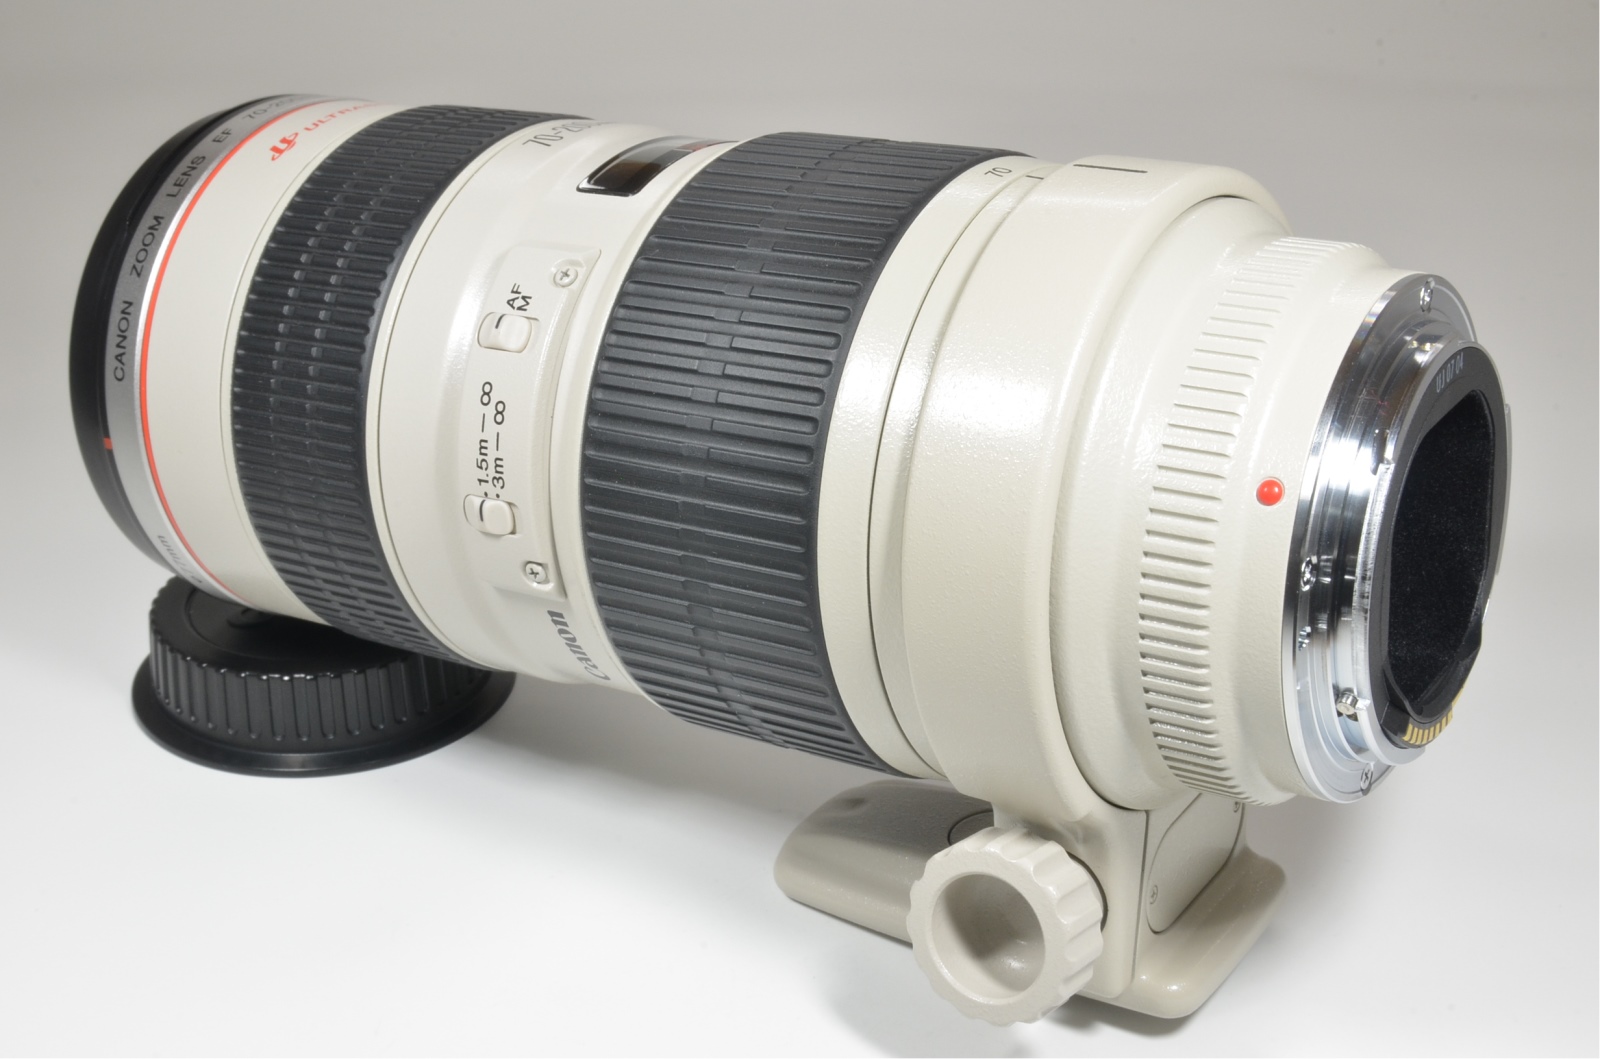 Canon EF 70-200mm f/2.8 L USM ULTRASONIC Lens with PL-Filter #a0921 â SuperB JAPAN CAMERA